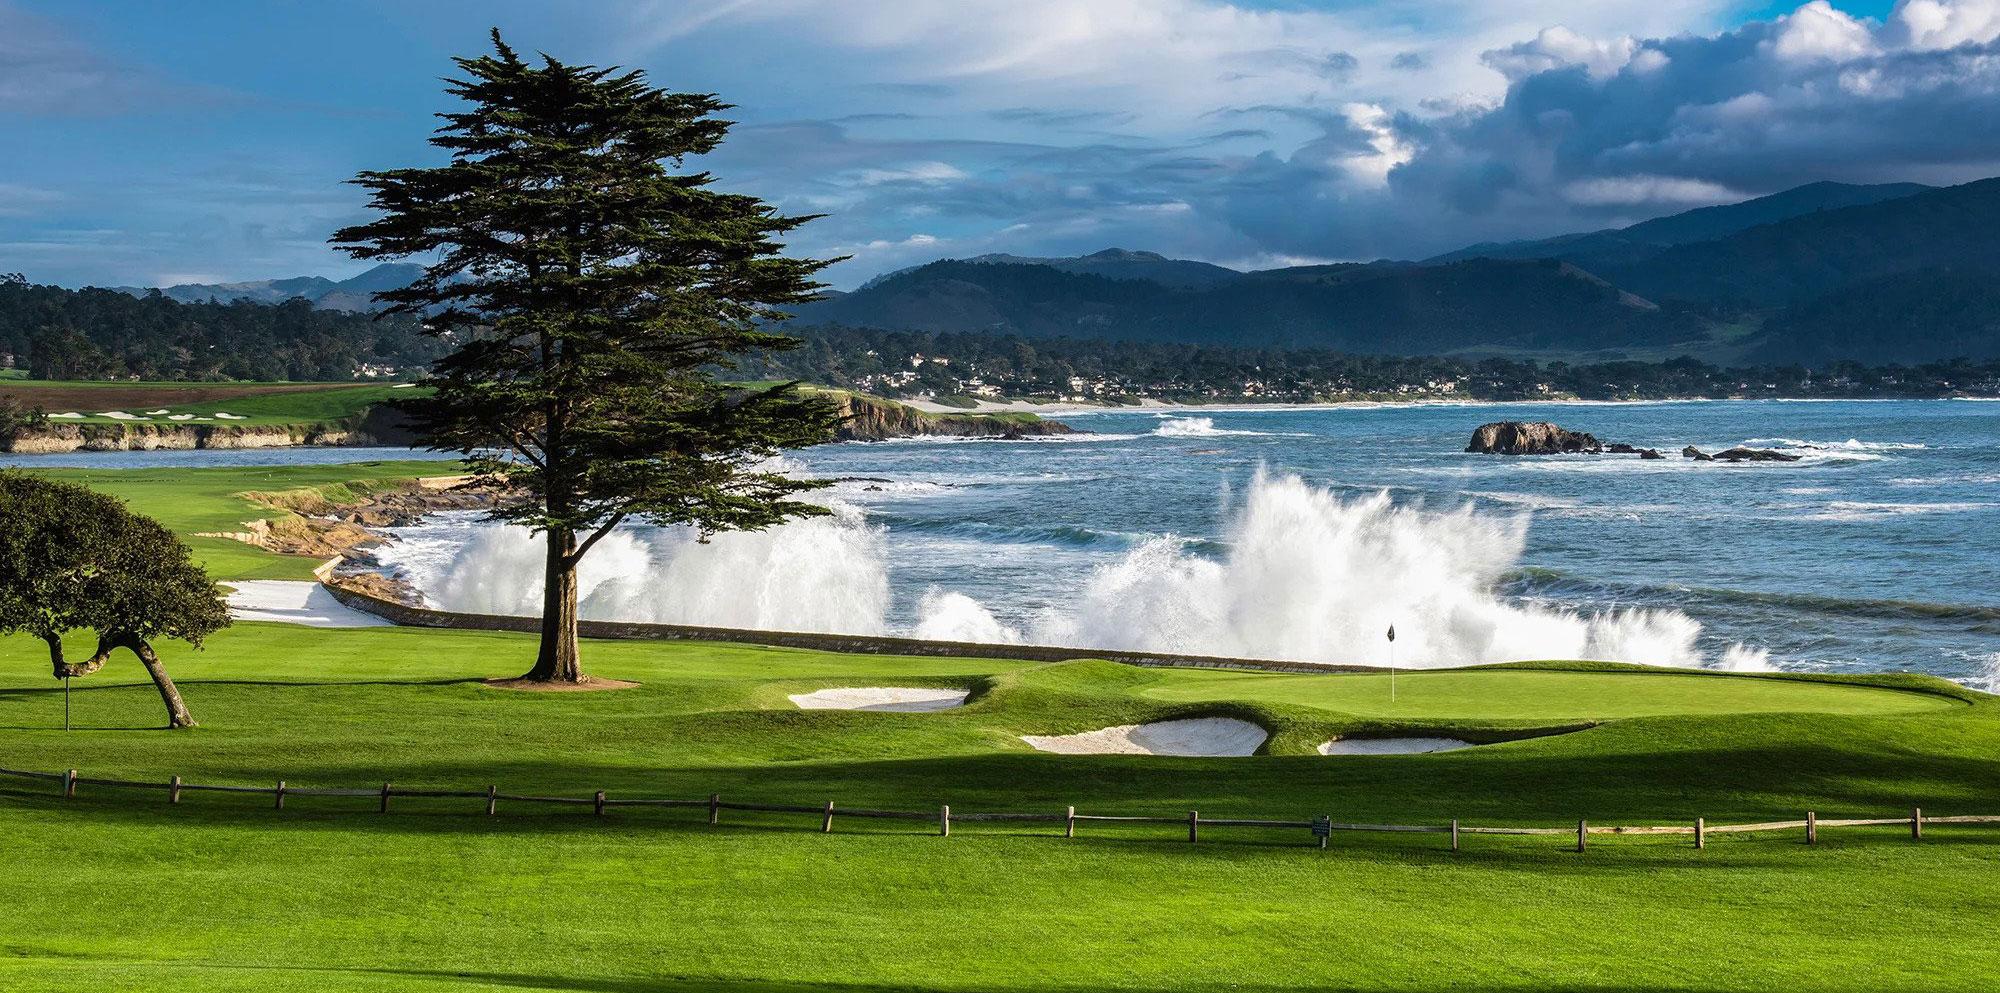 The US Open at Pebble Beach